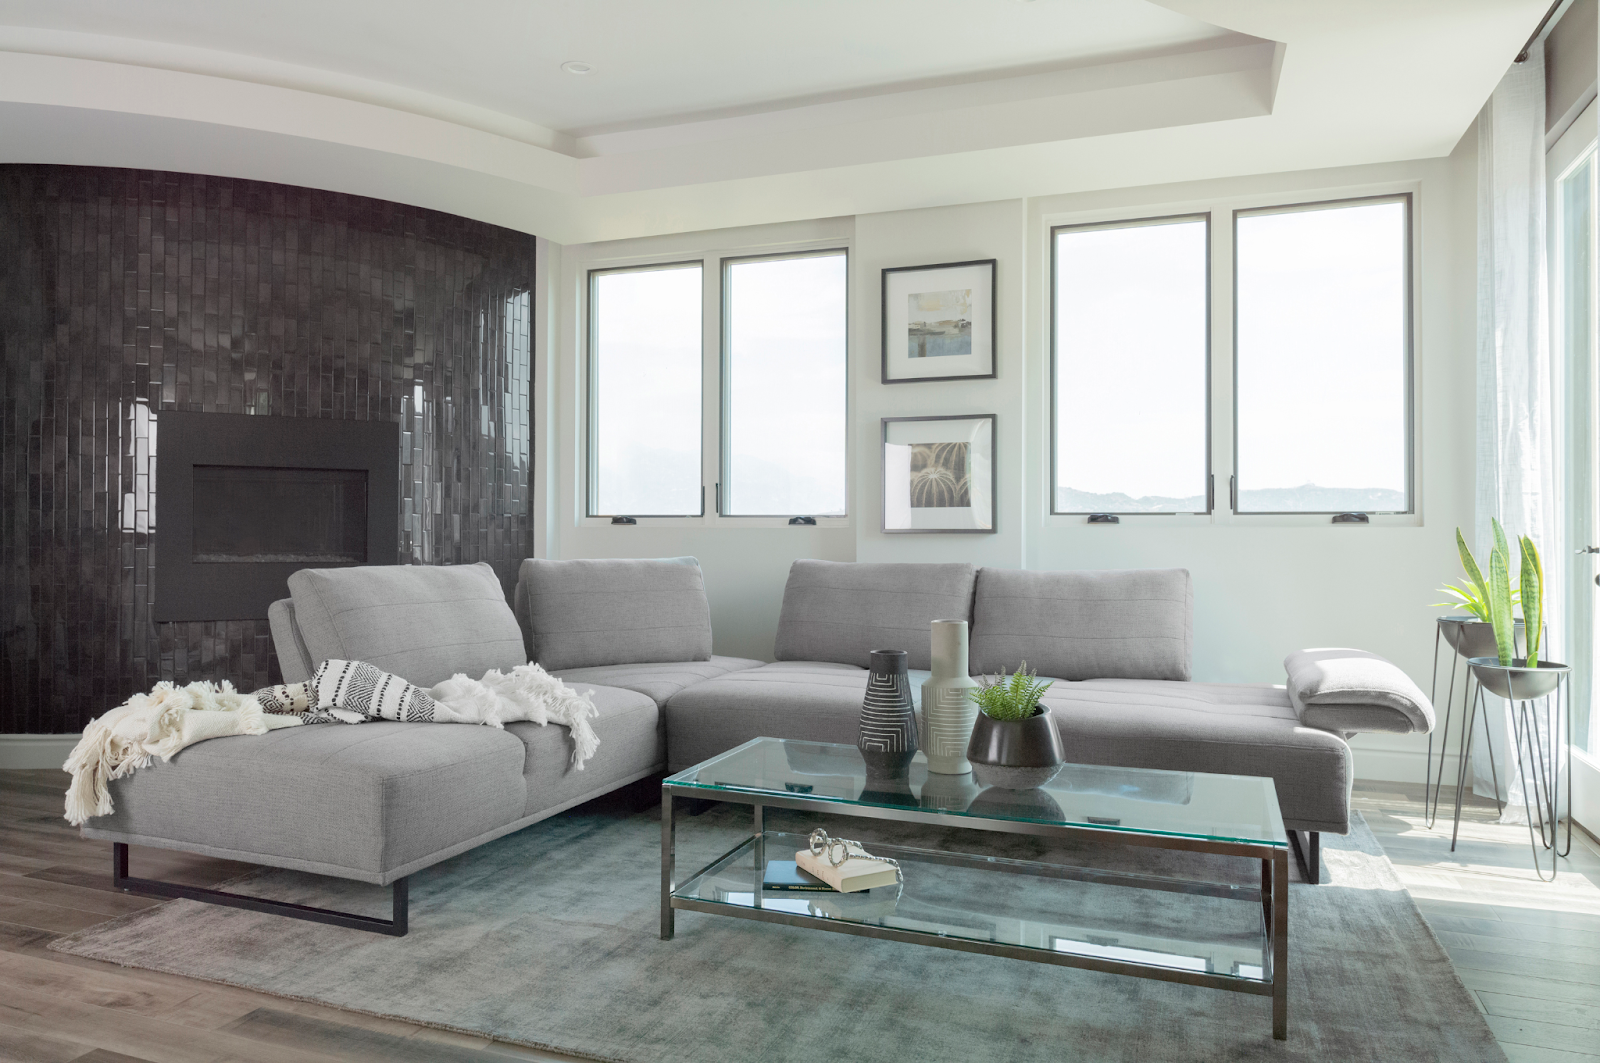 Modular furniture system: Arden 2-piece Adjustable Back Sectional Taupe